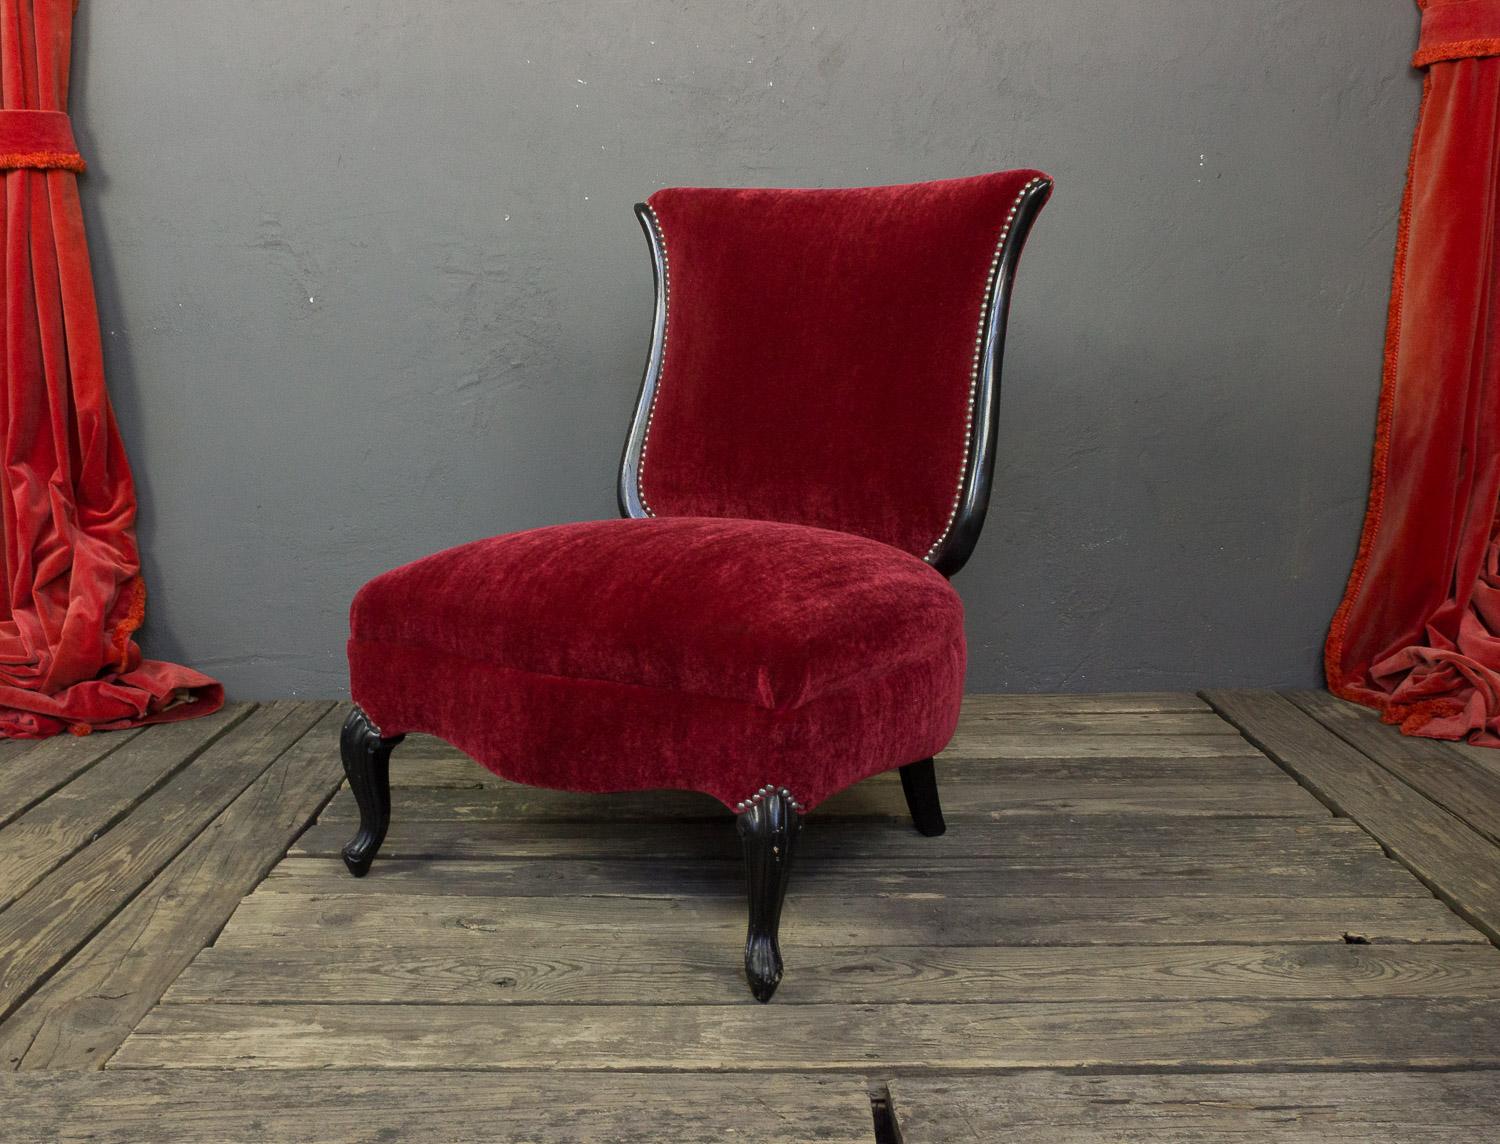 An exceptional American 1950s slipper chair with recently ebonized legs. This slipper chair is a truly stunning piece of furniture. Its new upholstery in rich red velvet with antique nickel nail heads provides a classic yet modern look that is sure